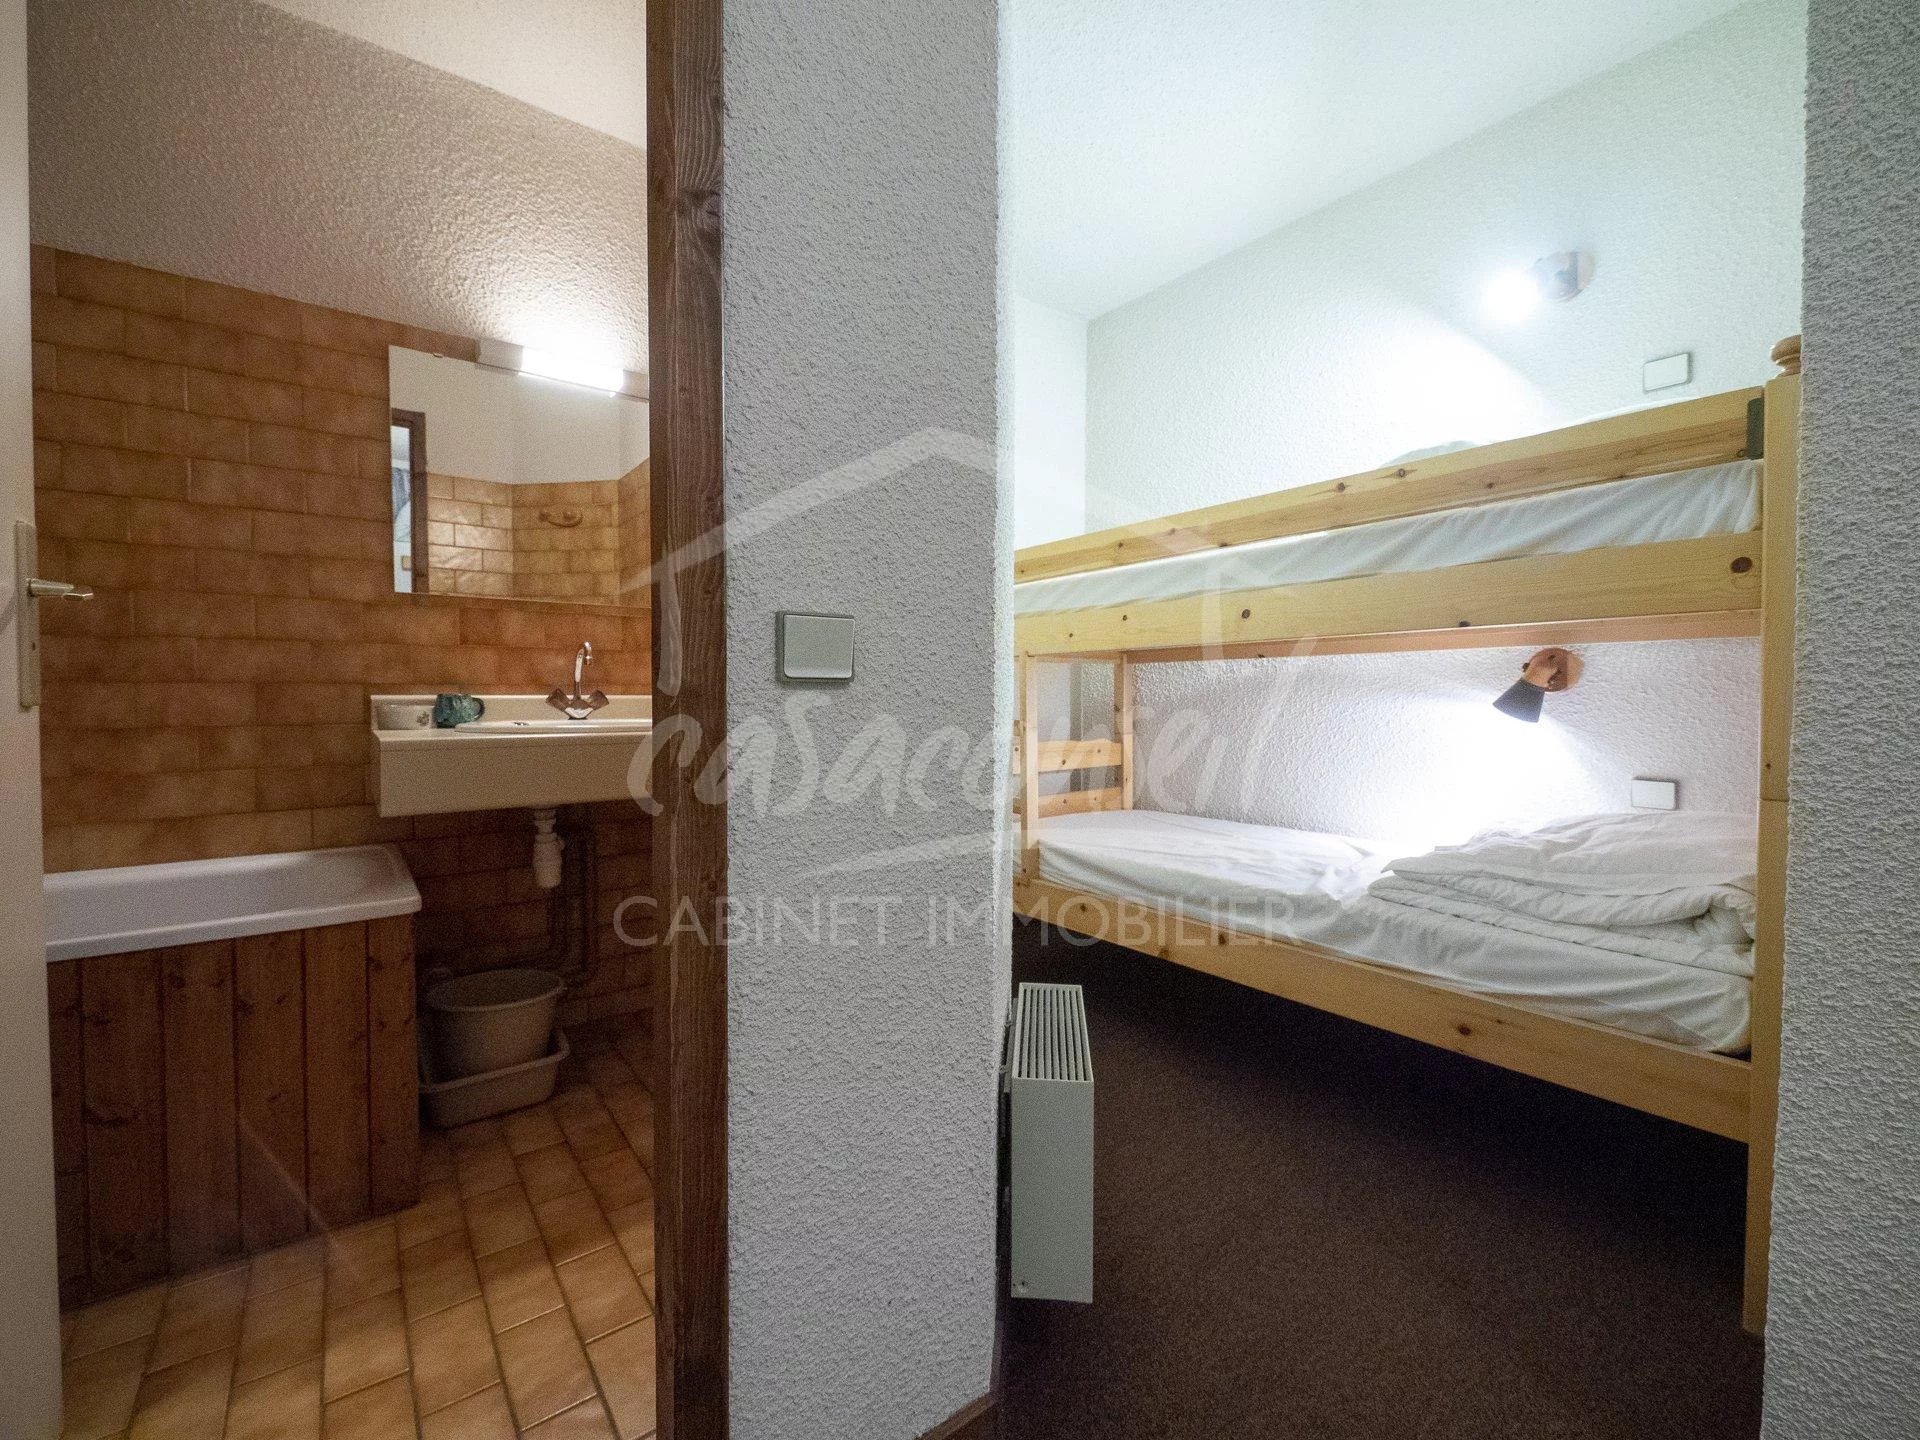 SAINT GERVAIS MONT BLANC - Studio + sleeping area at the foot of the slopes